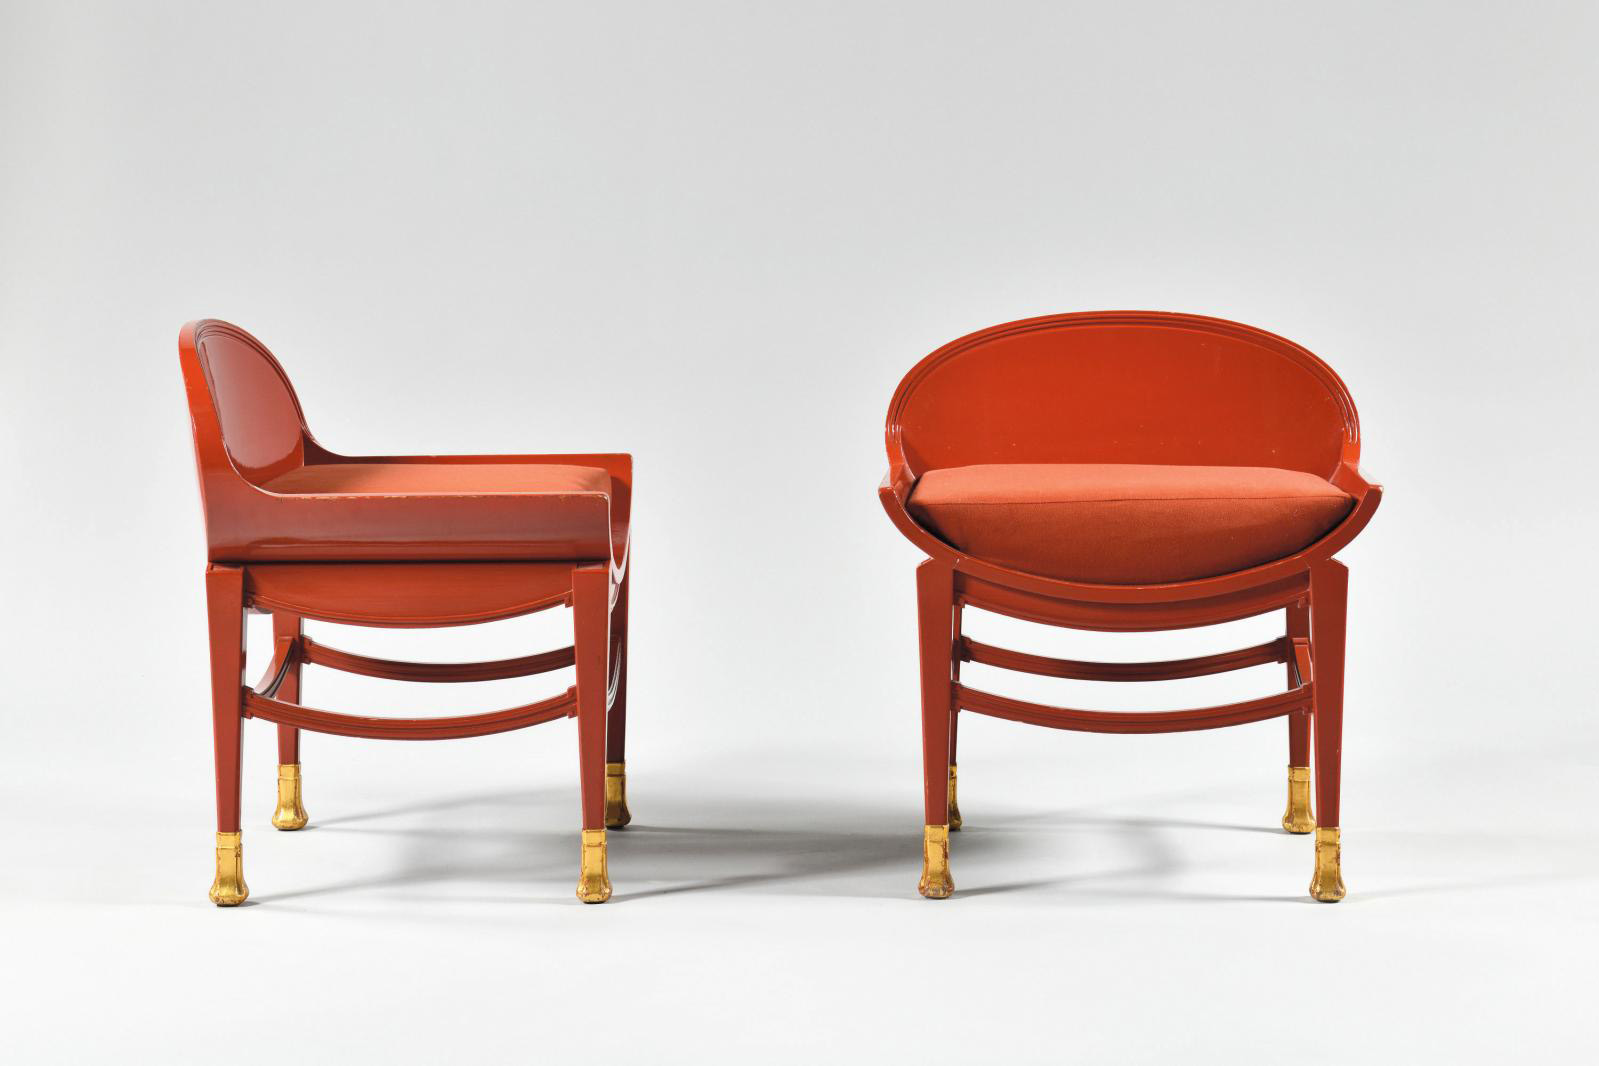 Georges de Feure’s Chairs: Chic Lacquer 